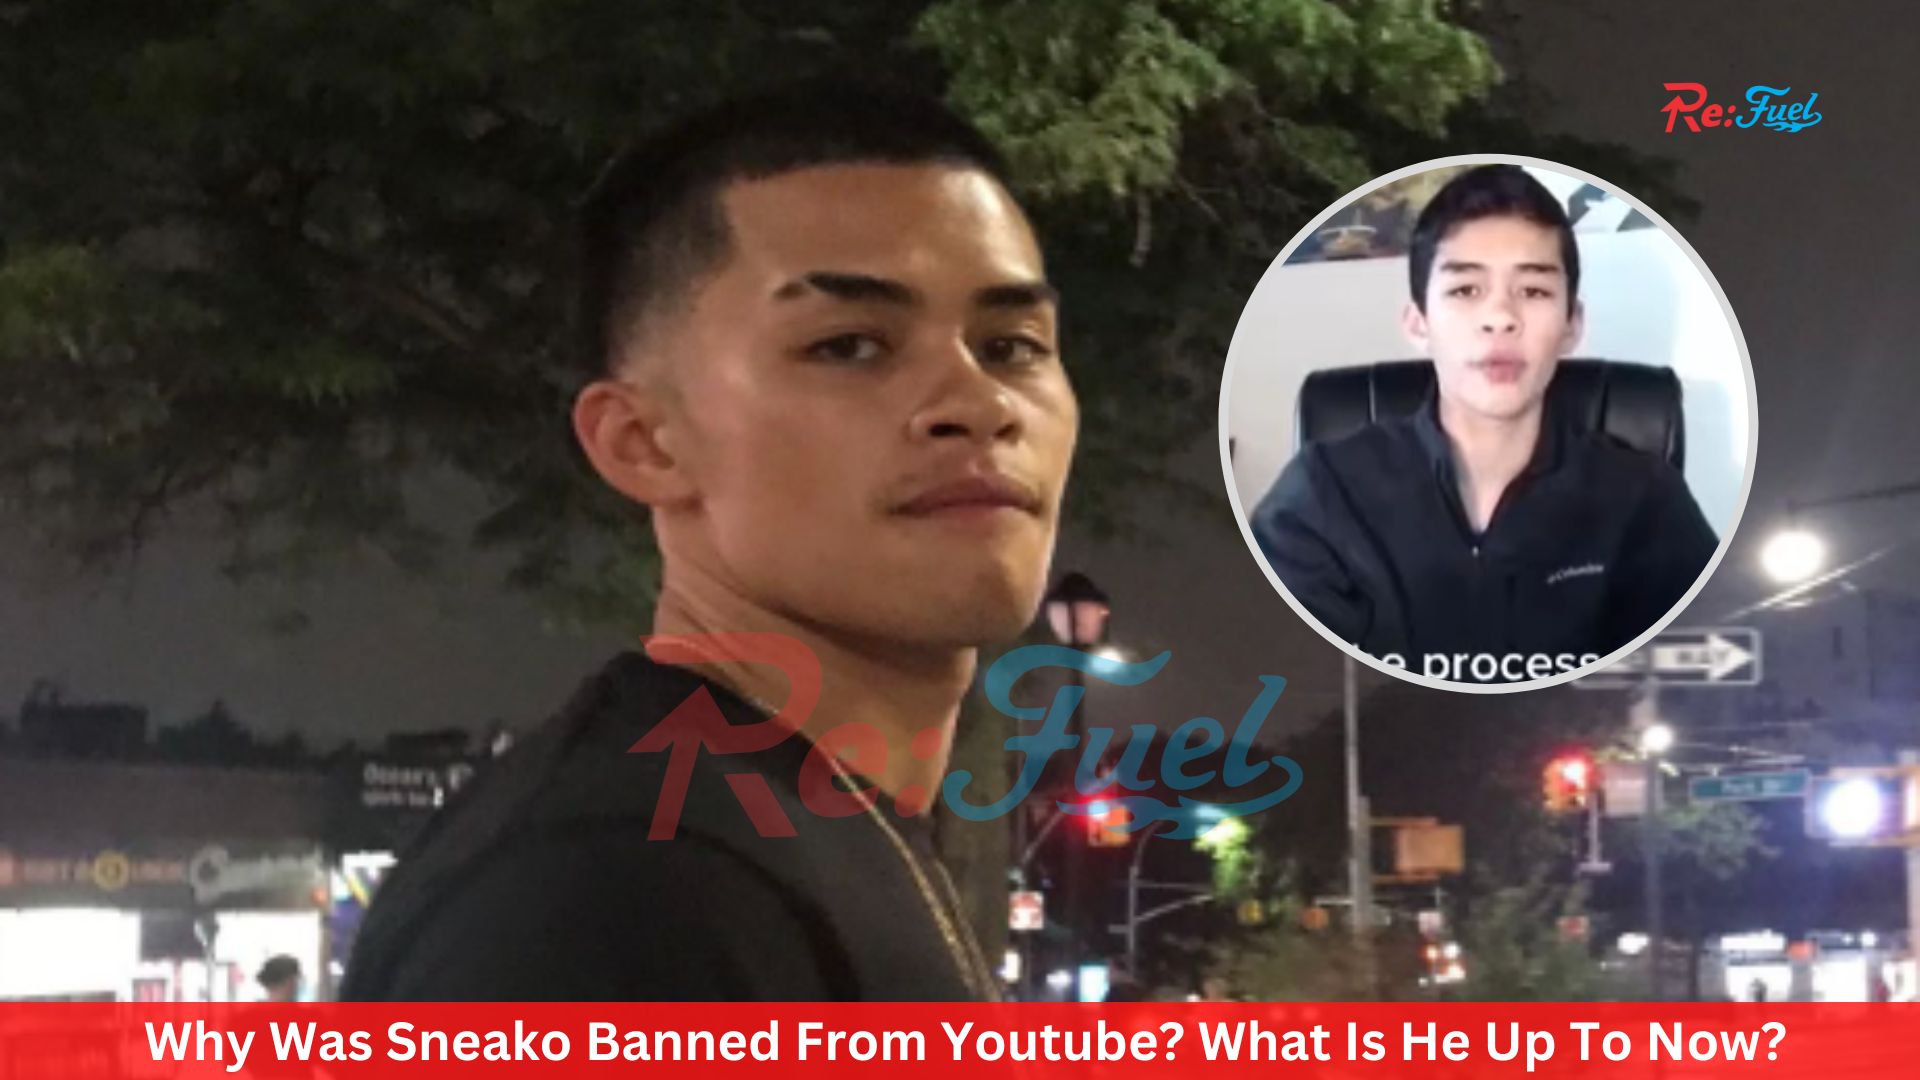 Why Was Sneako Banned From Youtube? What Is He Up To Now?